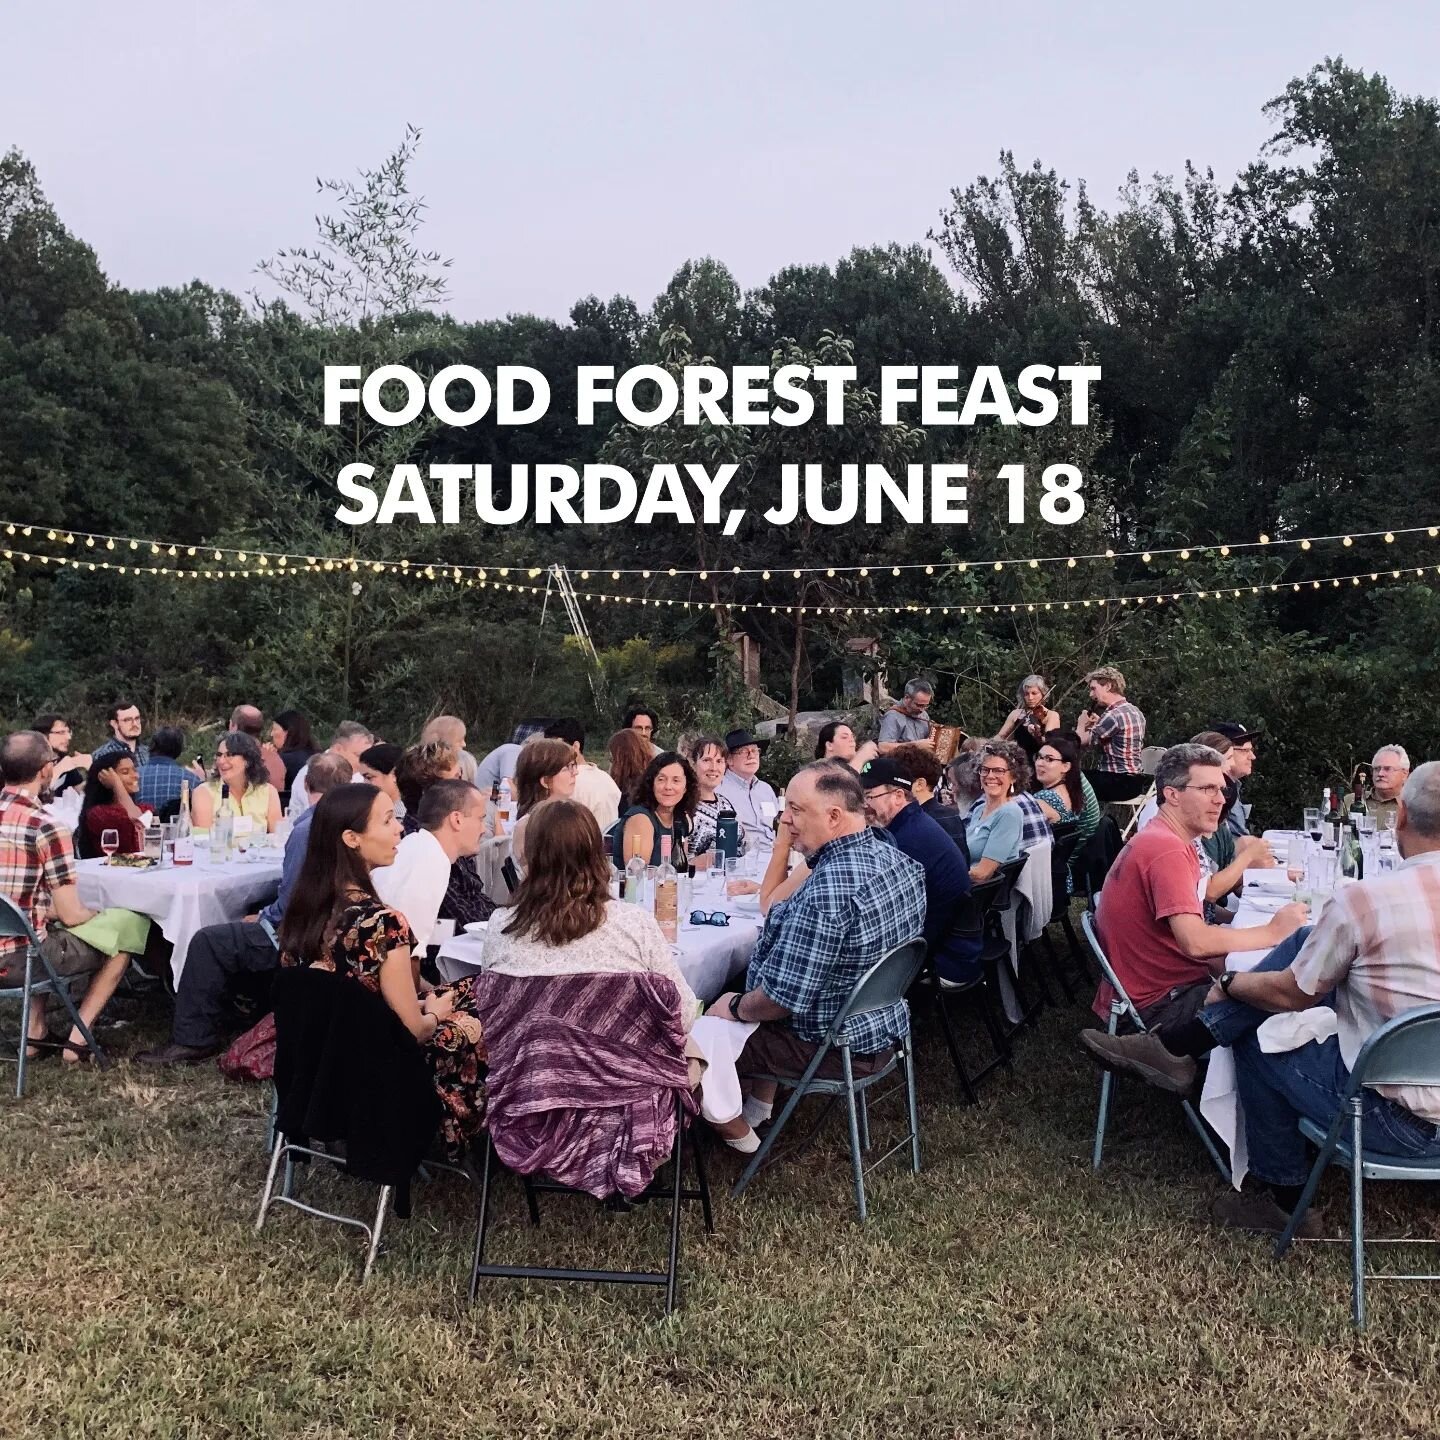 Try some foods you might have never had before, with music and good company in a thriving food forest!